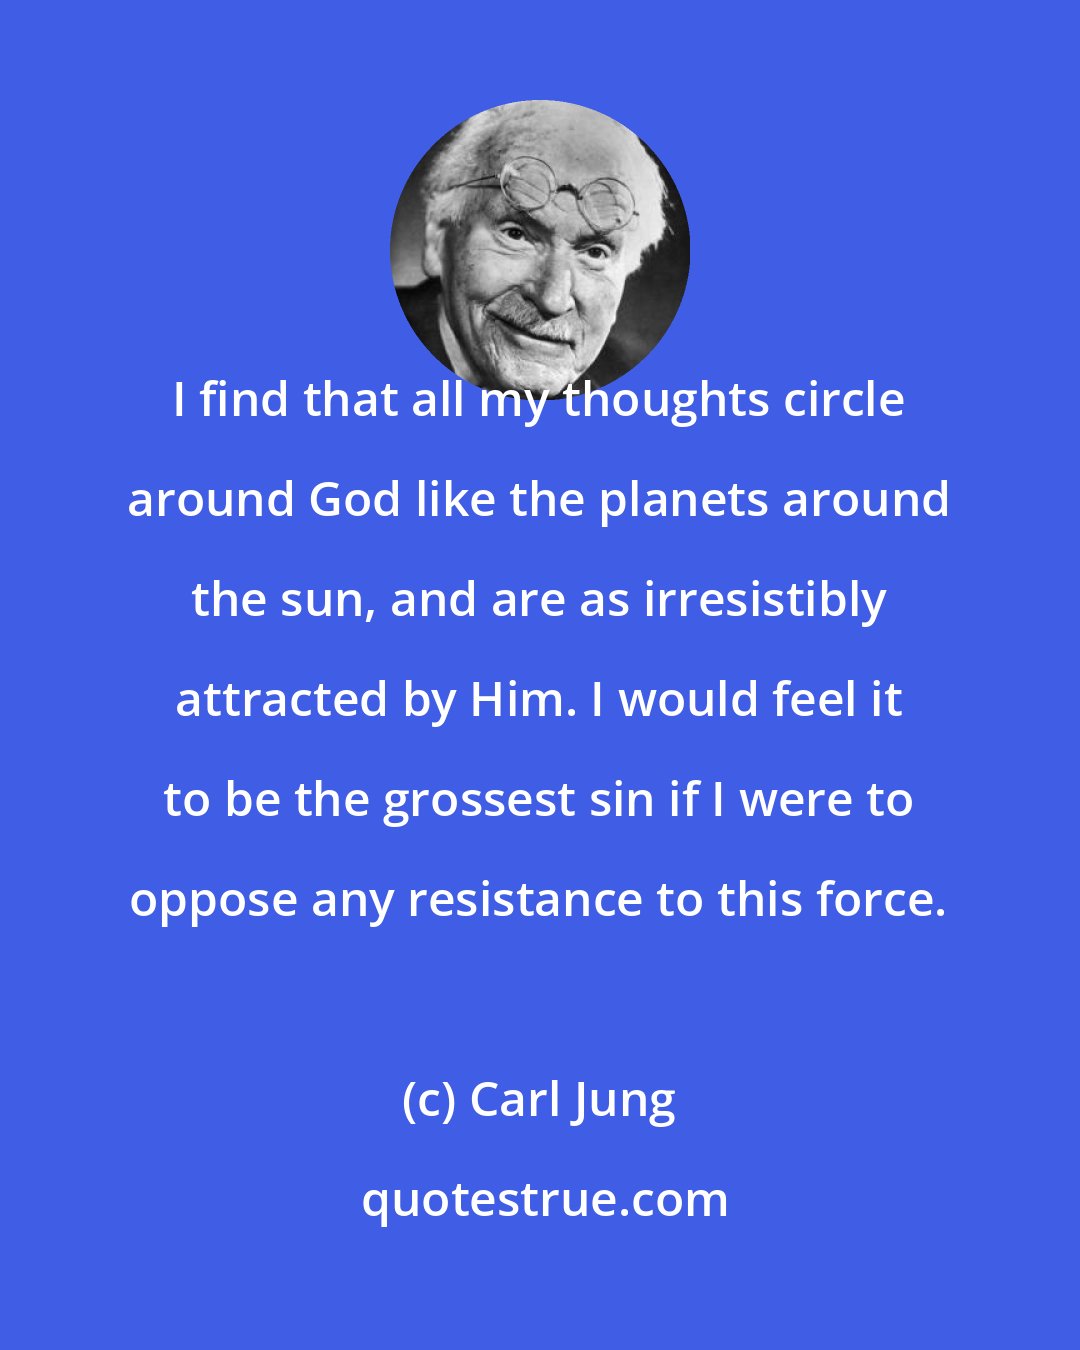 Carl Jung: I find that all my thoughts circle around God like the planets around the sun, and are as irresistibly attracted by Him. I would feel it to be the grossest sin if I were to oppose any resistance to this force.